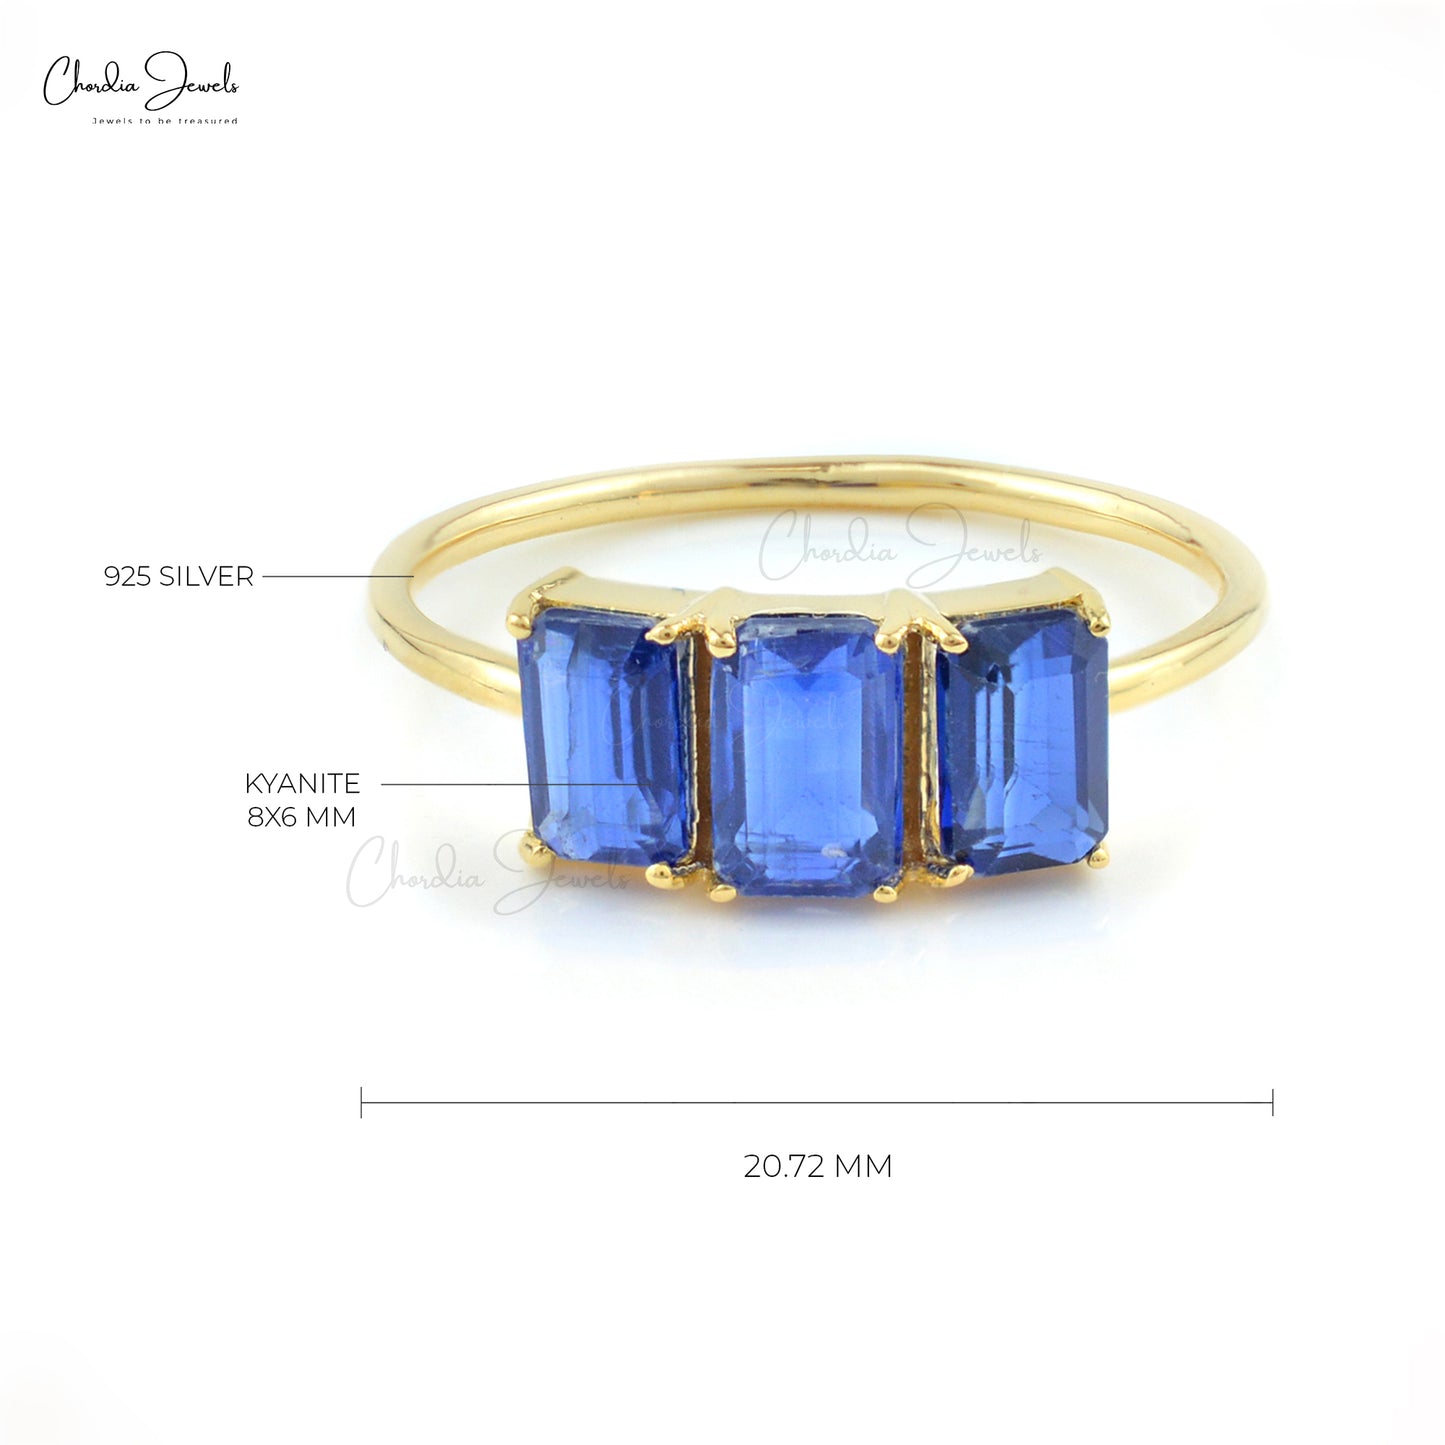 Load image into Gallery viewer, Top Grade 925 Sterling Silver 3 Stone Ring For Gift With Kyanite Gemstone Jewelry From Top Wholesaller At Offer Price
